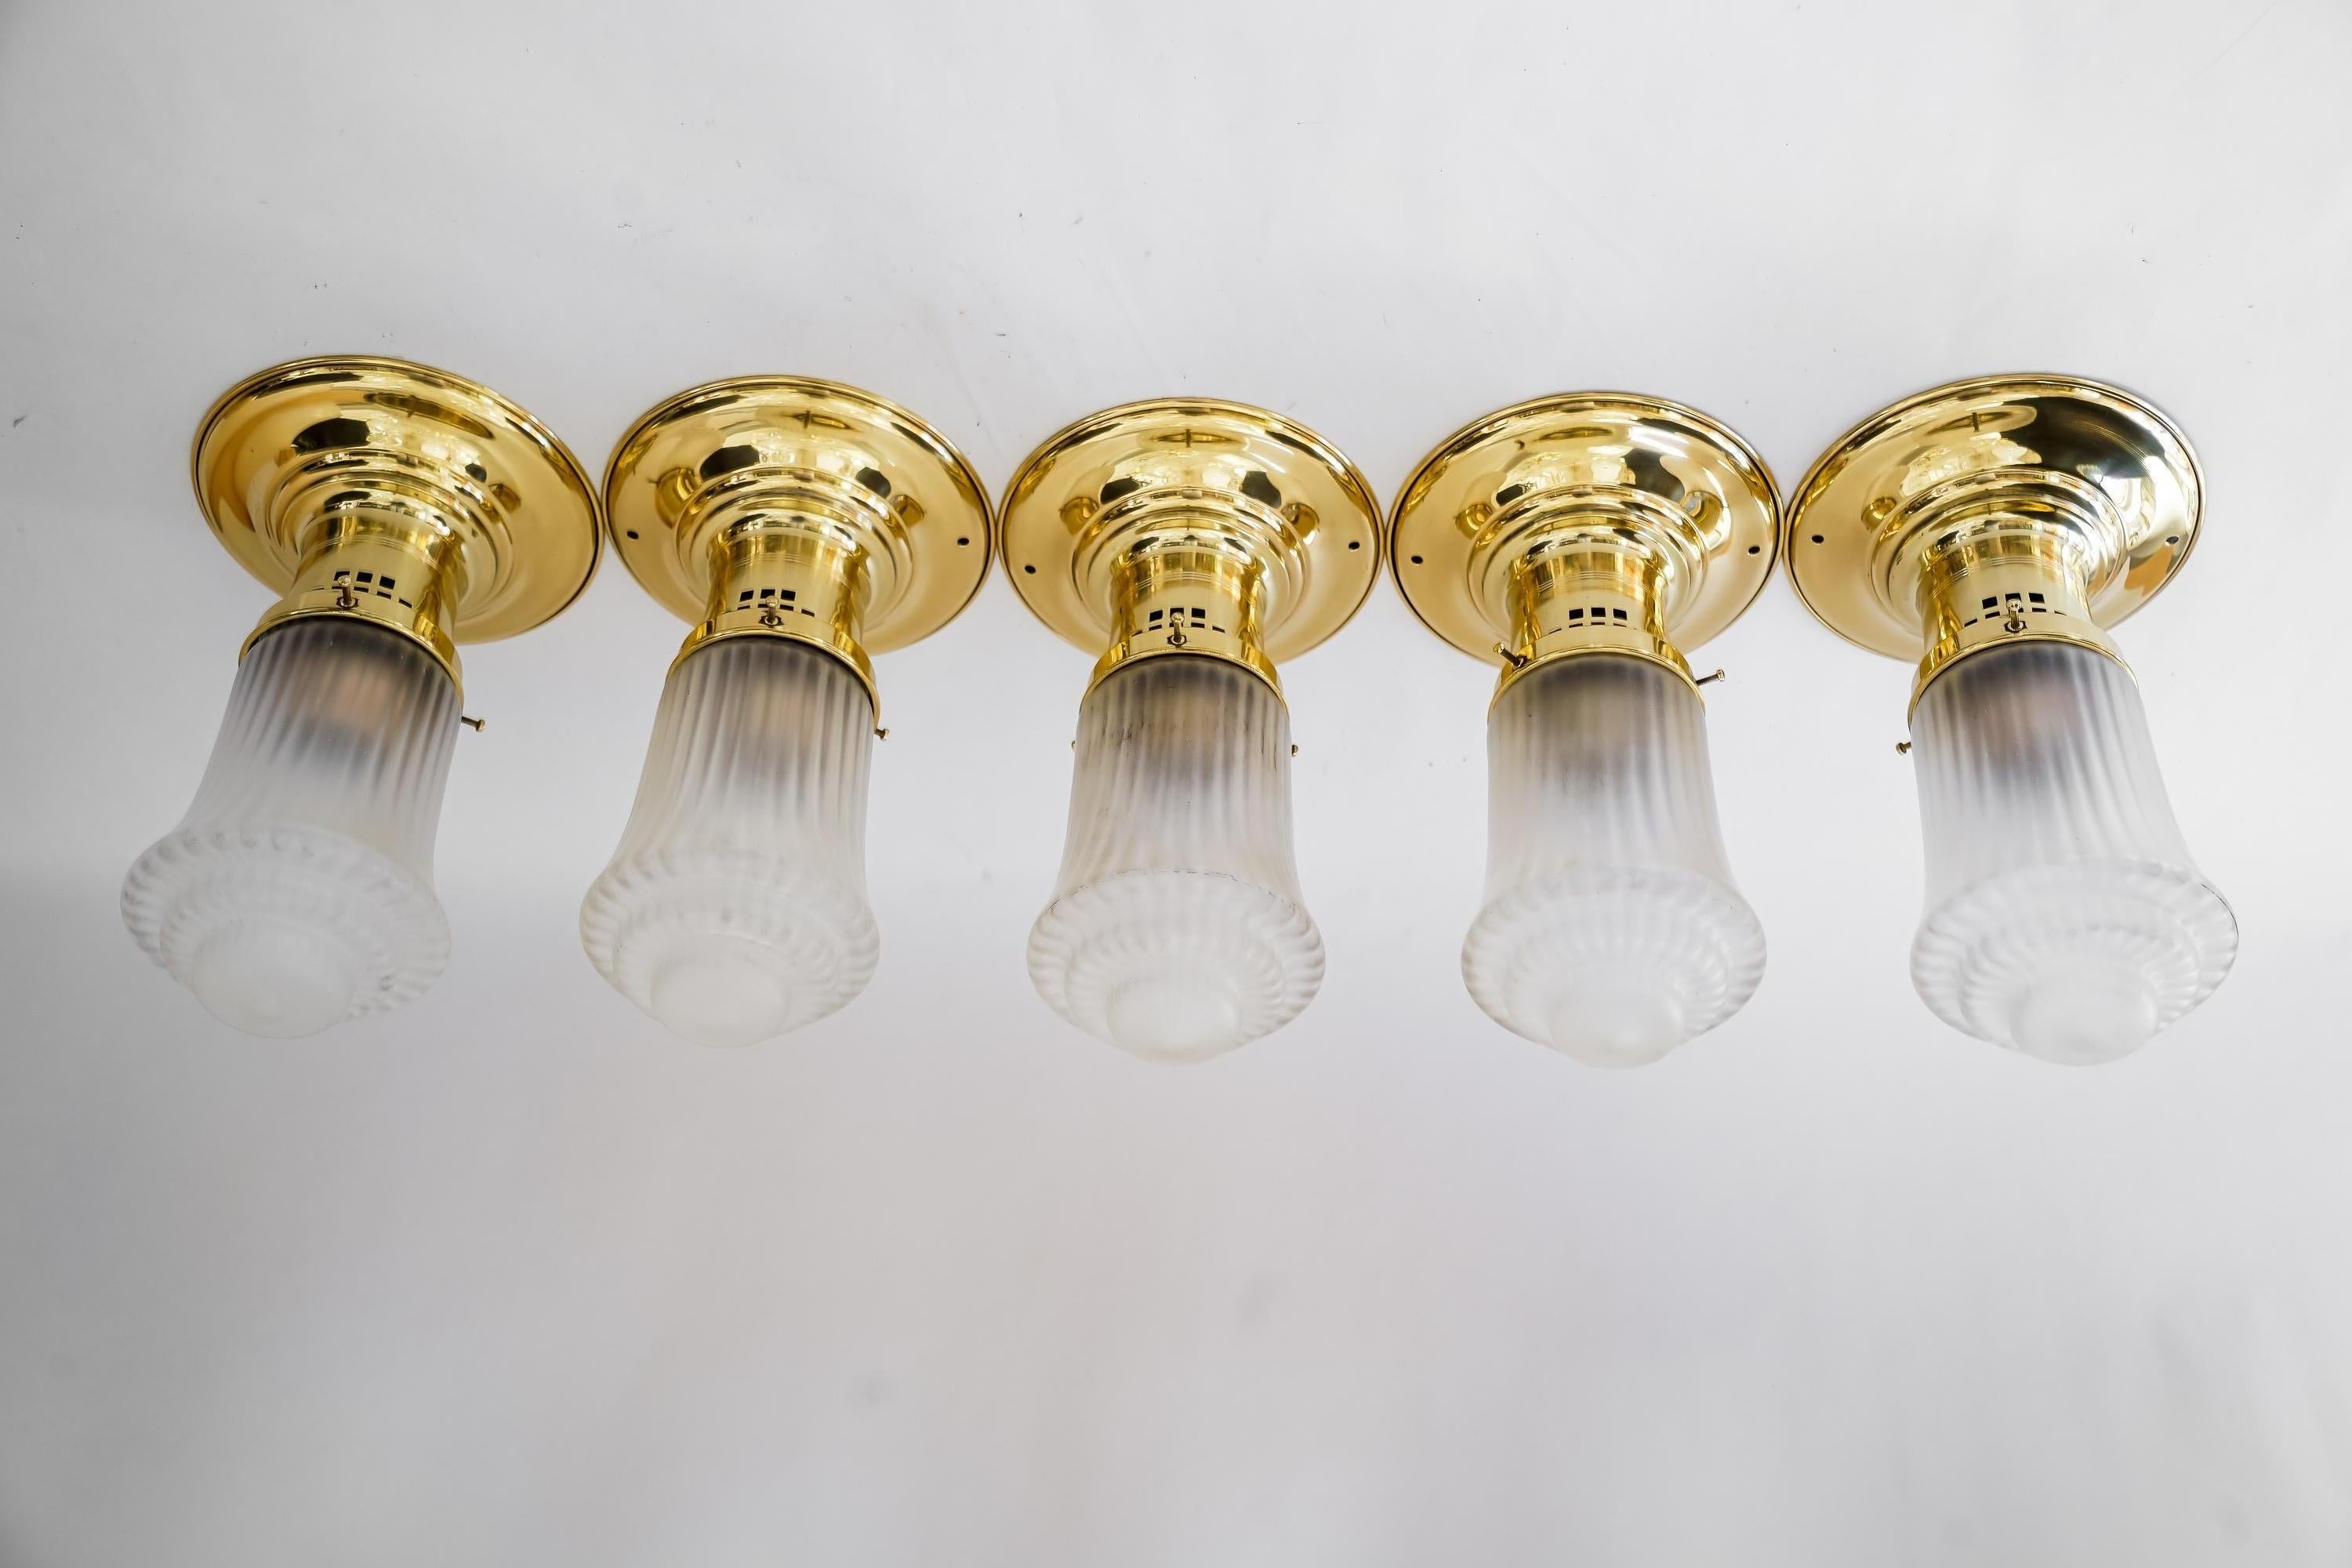 5 Art Deco ceiling lamps with original antique glass shades vienna around 1920s 
Polished and stove enameled
4 ceiling lamps has holes for mounting directly to the ceiling 
One has not the holes.
Price per piece.